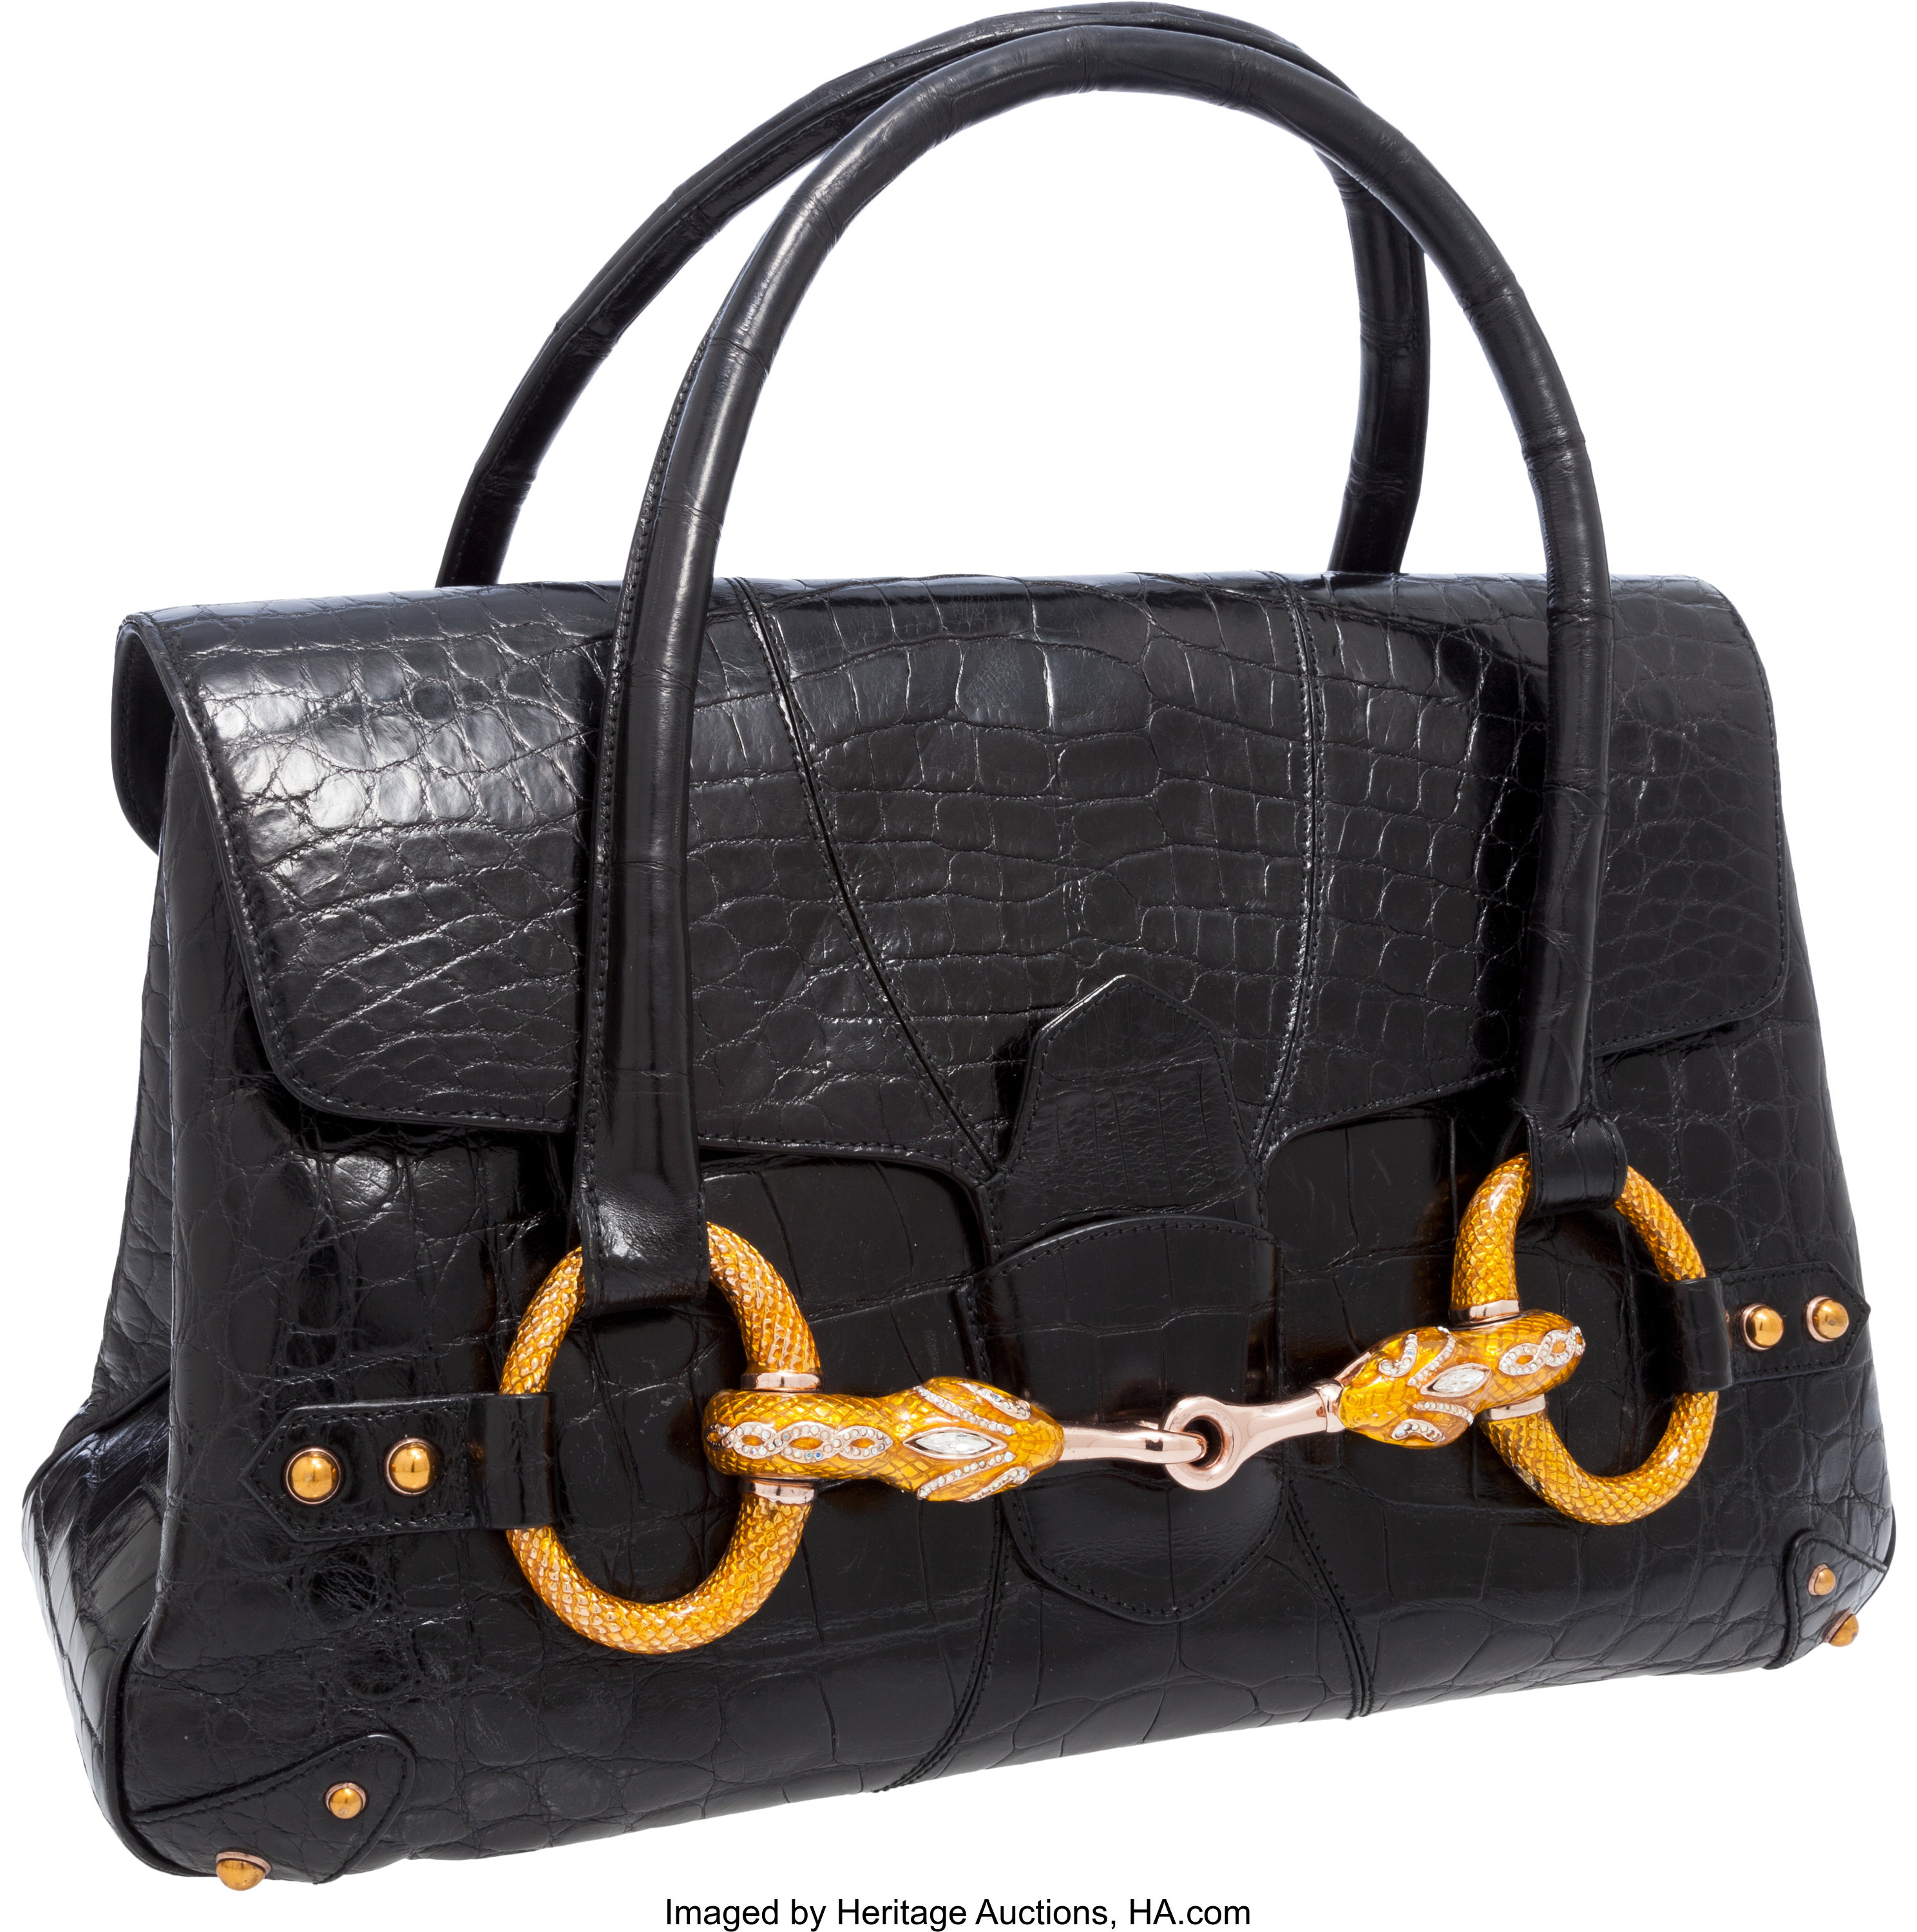 Sold at Auction: GUCCI BY TOM FORD HORSEBIT CHAIN CLUTCH BAG